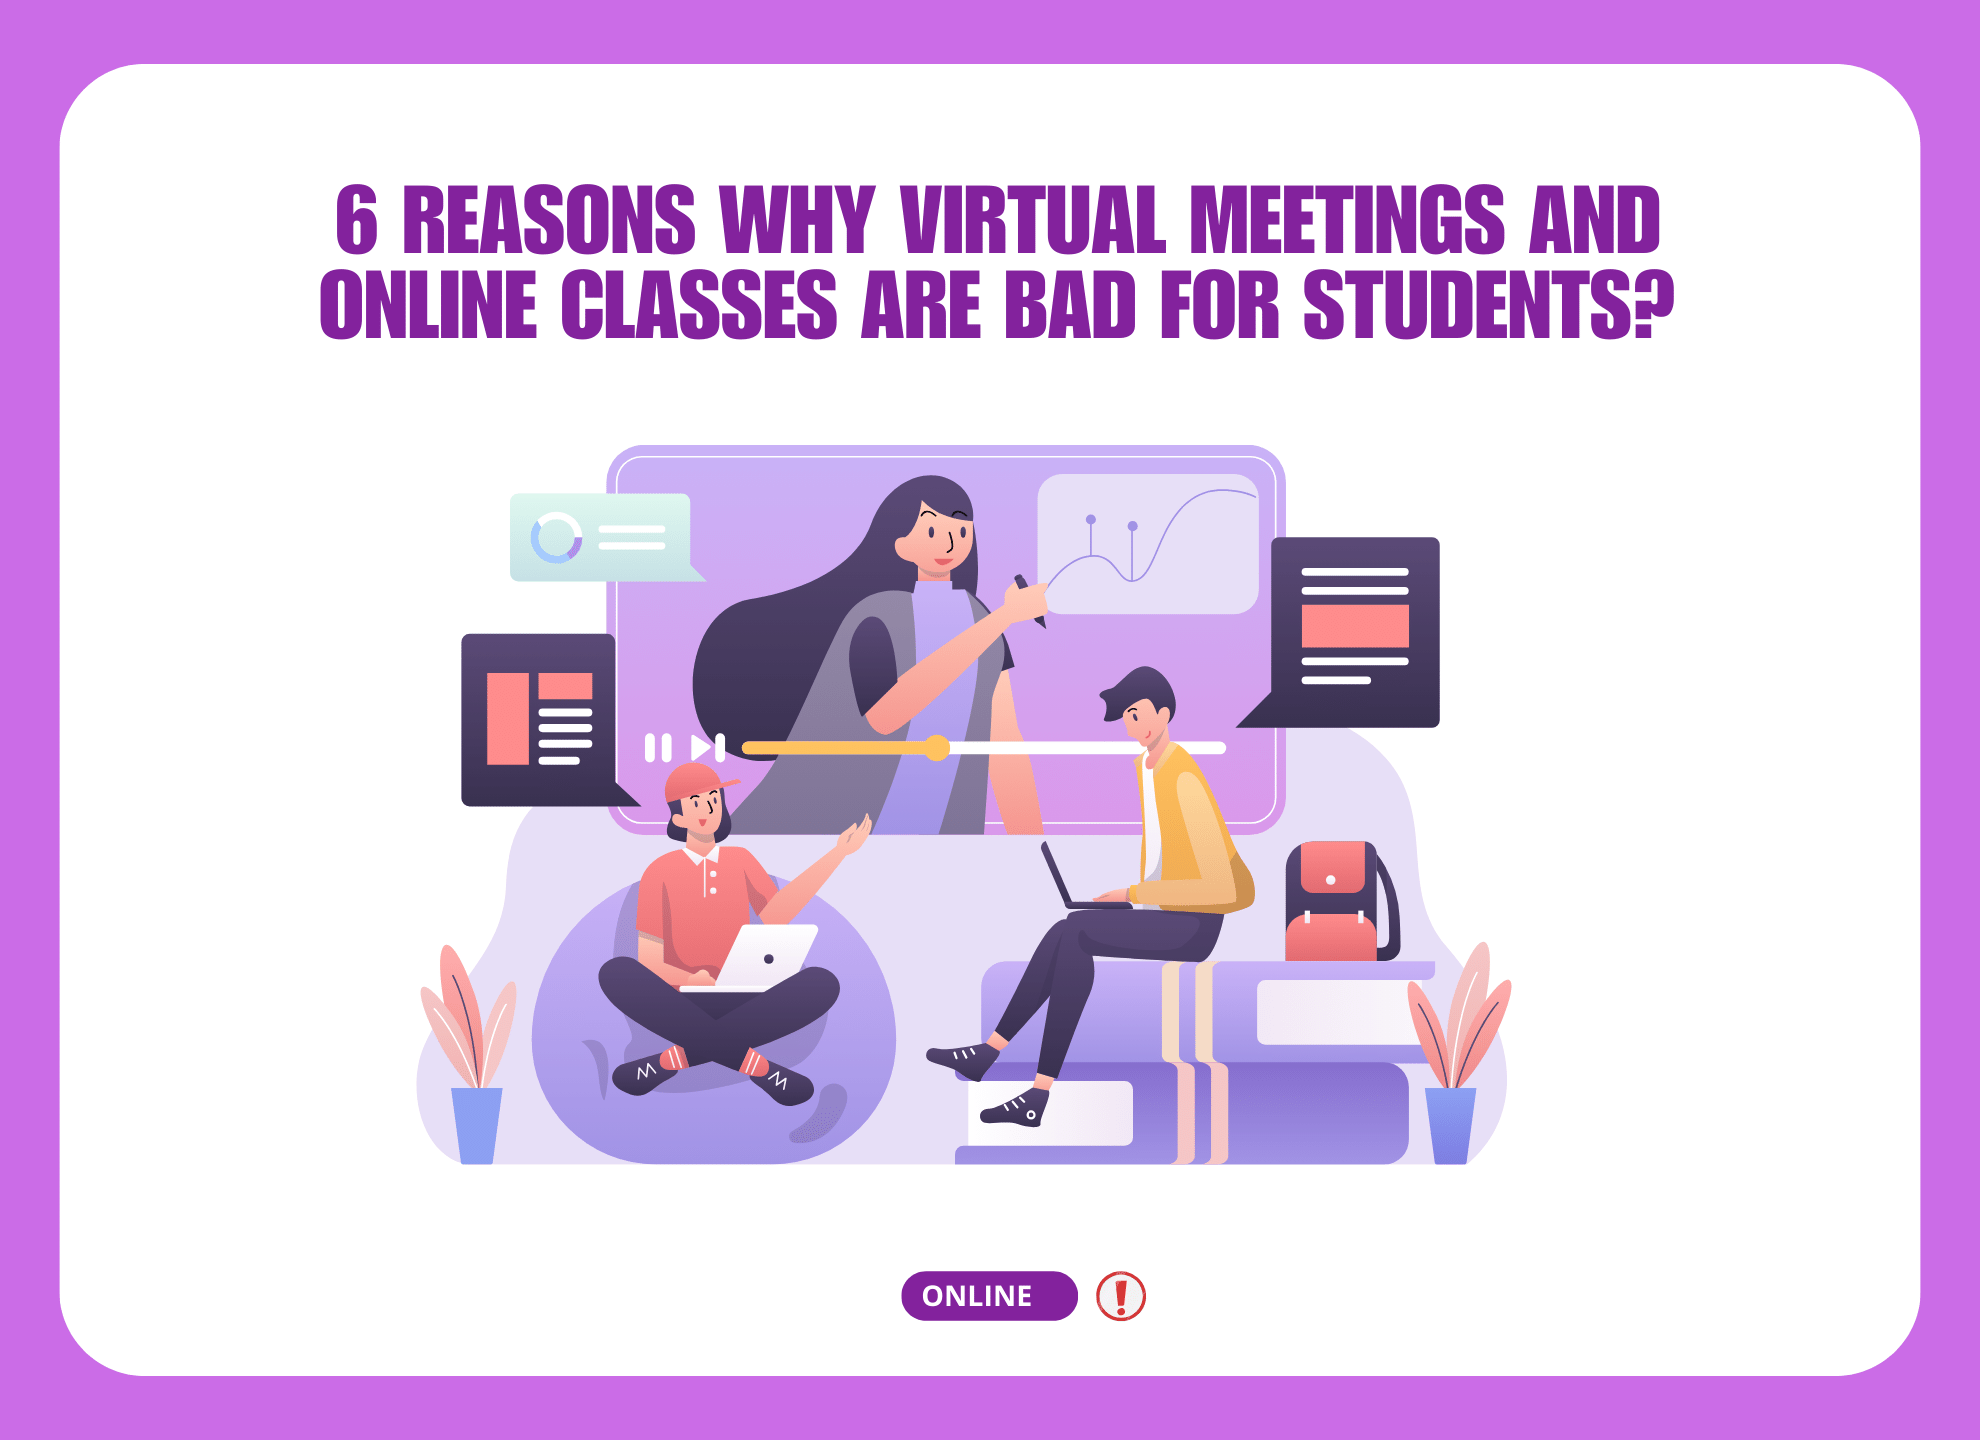 Reasons Why Virtual Meetings Are Bad for Students